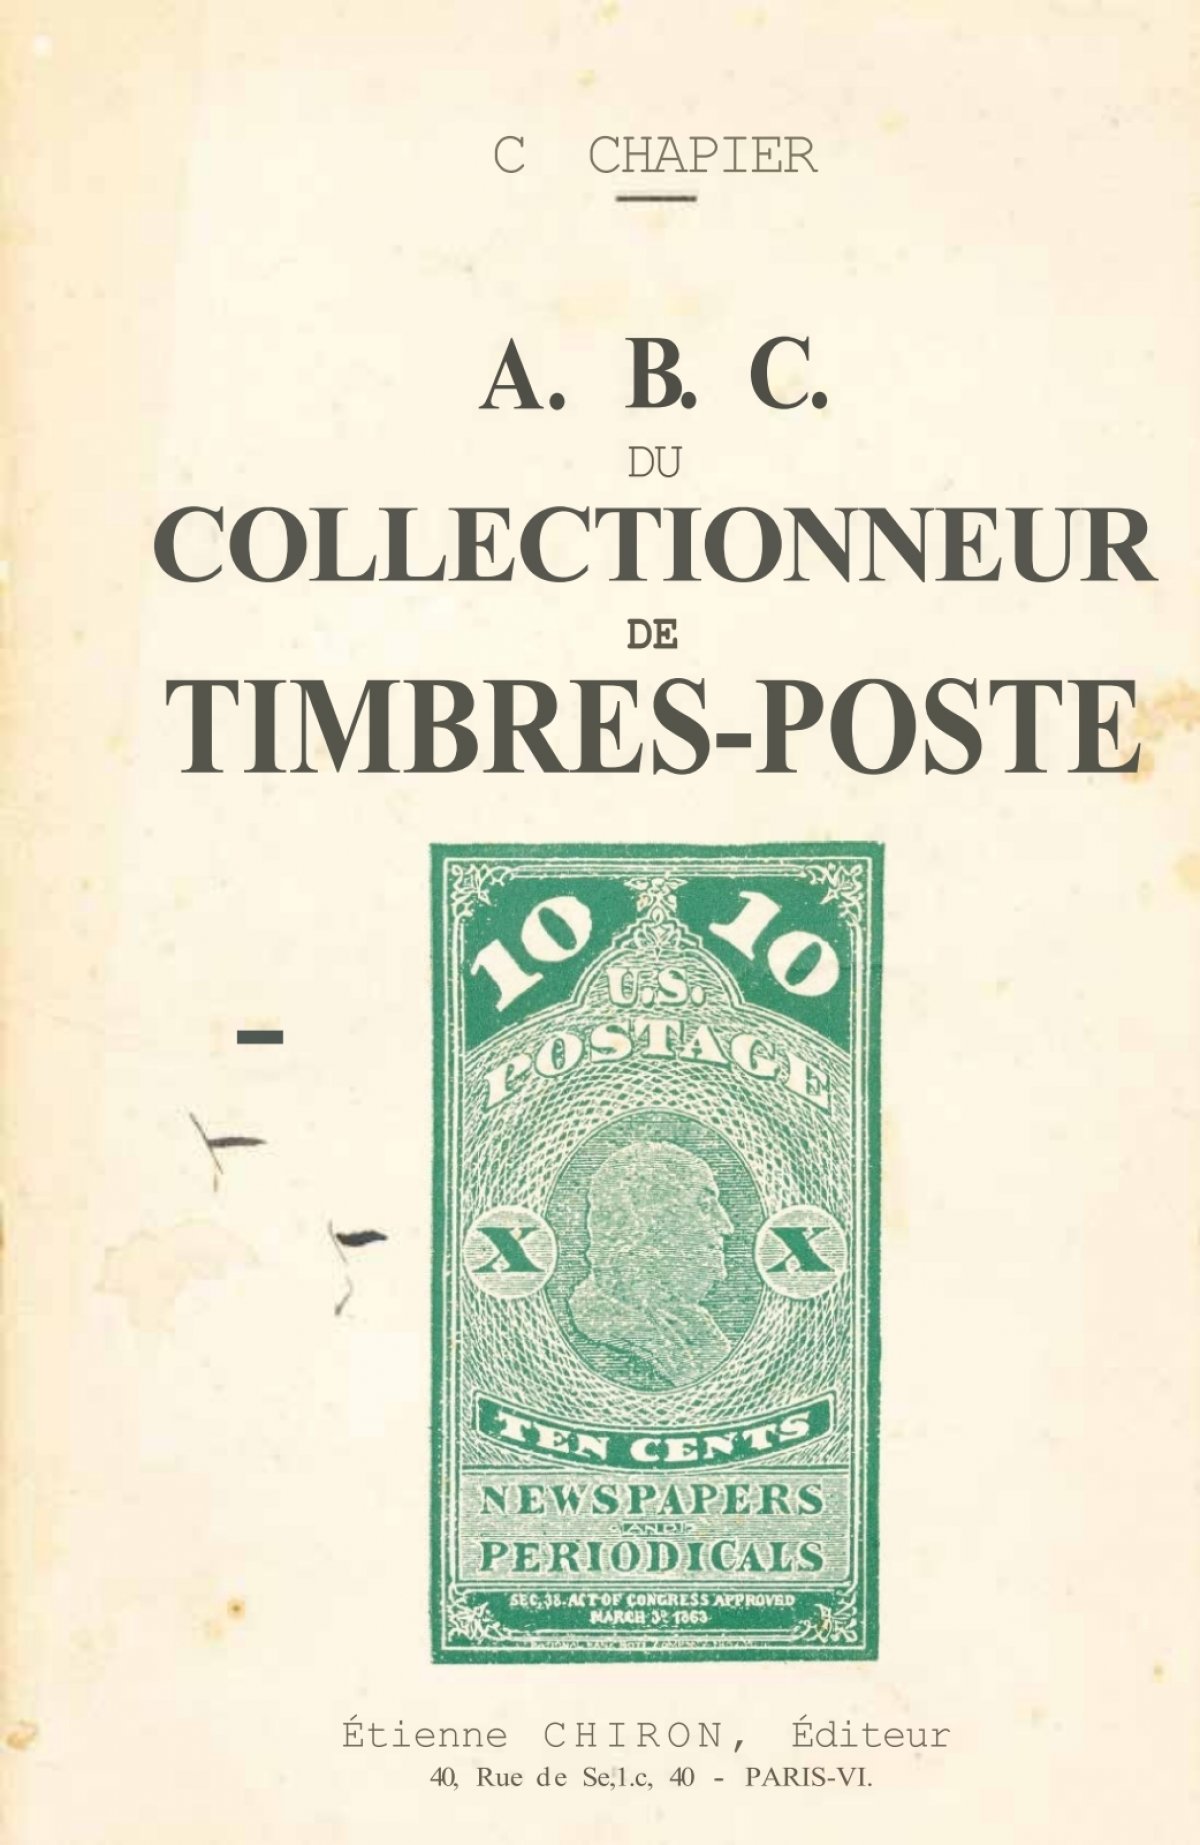 Classeur Basic pour timbres 16 pages blanches VILLERS COLLECTIONS